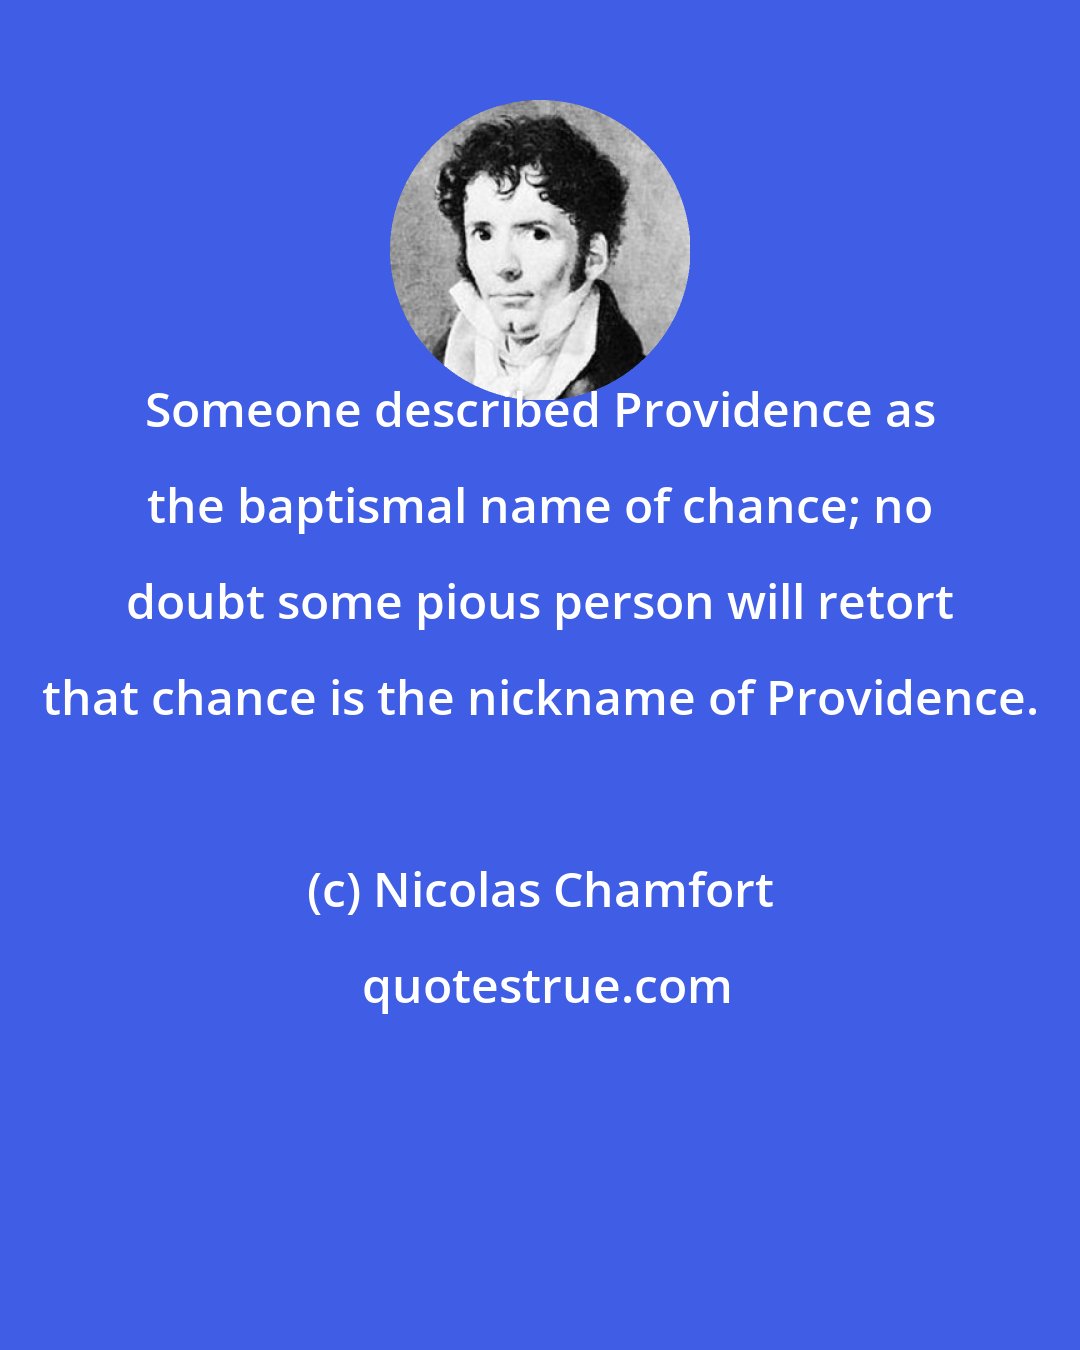 Nicolas Chamfort: Someone described Providence as the baptismal name of chance; no doubt some pious person will retort that chance is the nickname of Providence.